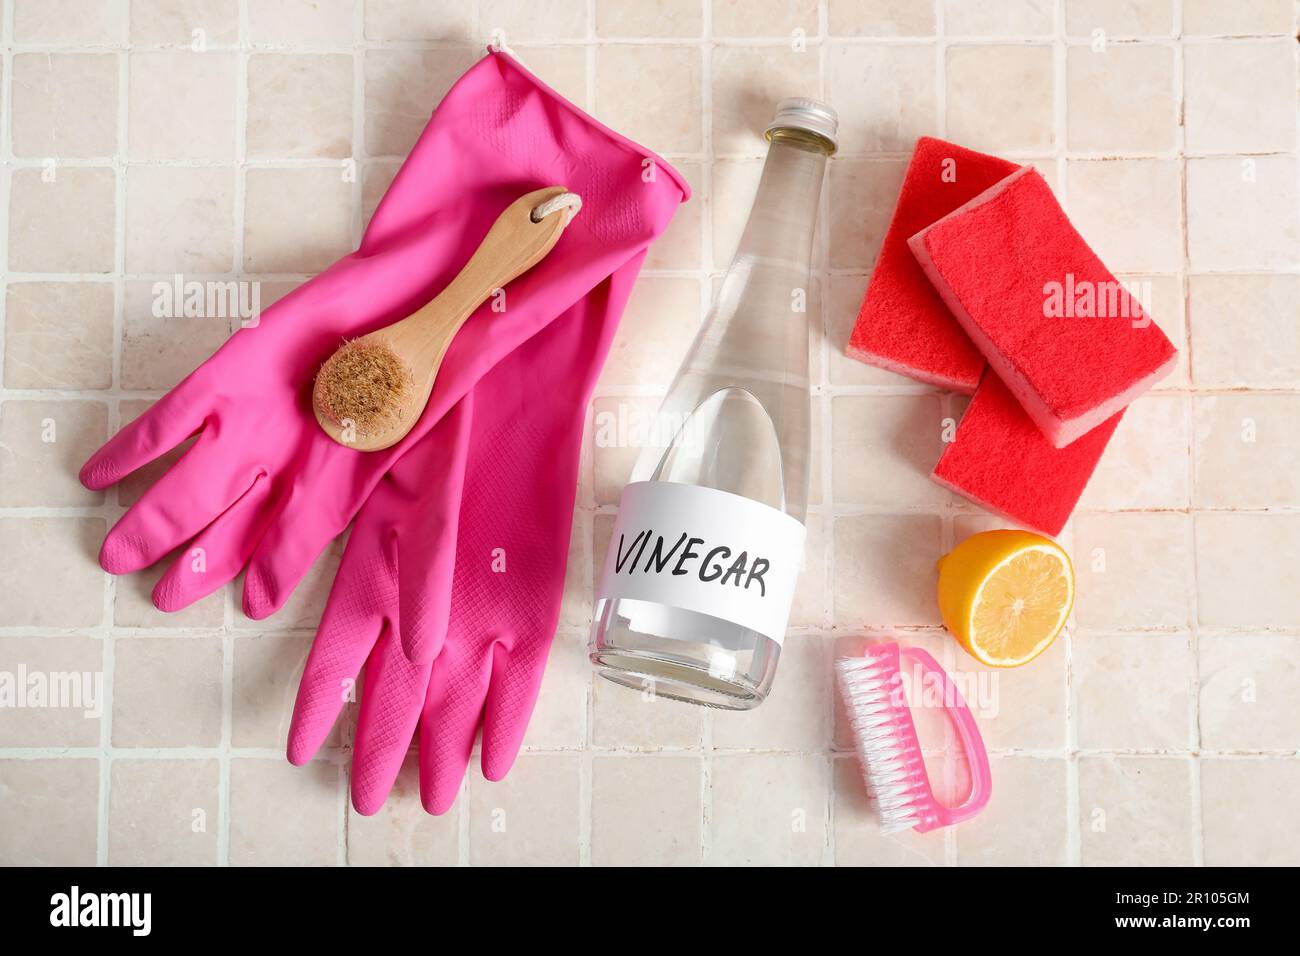 How to Sanitize Sponges and Scrub Brushes With Vinegar